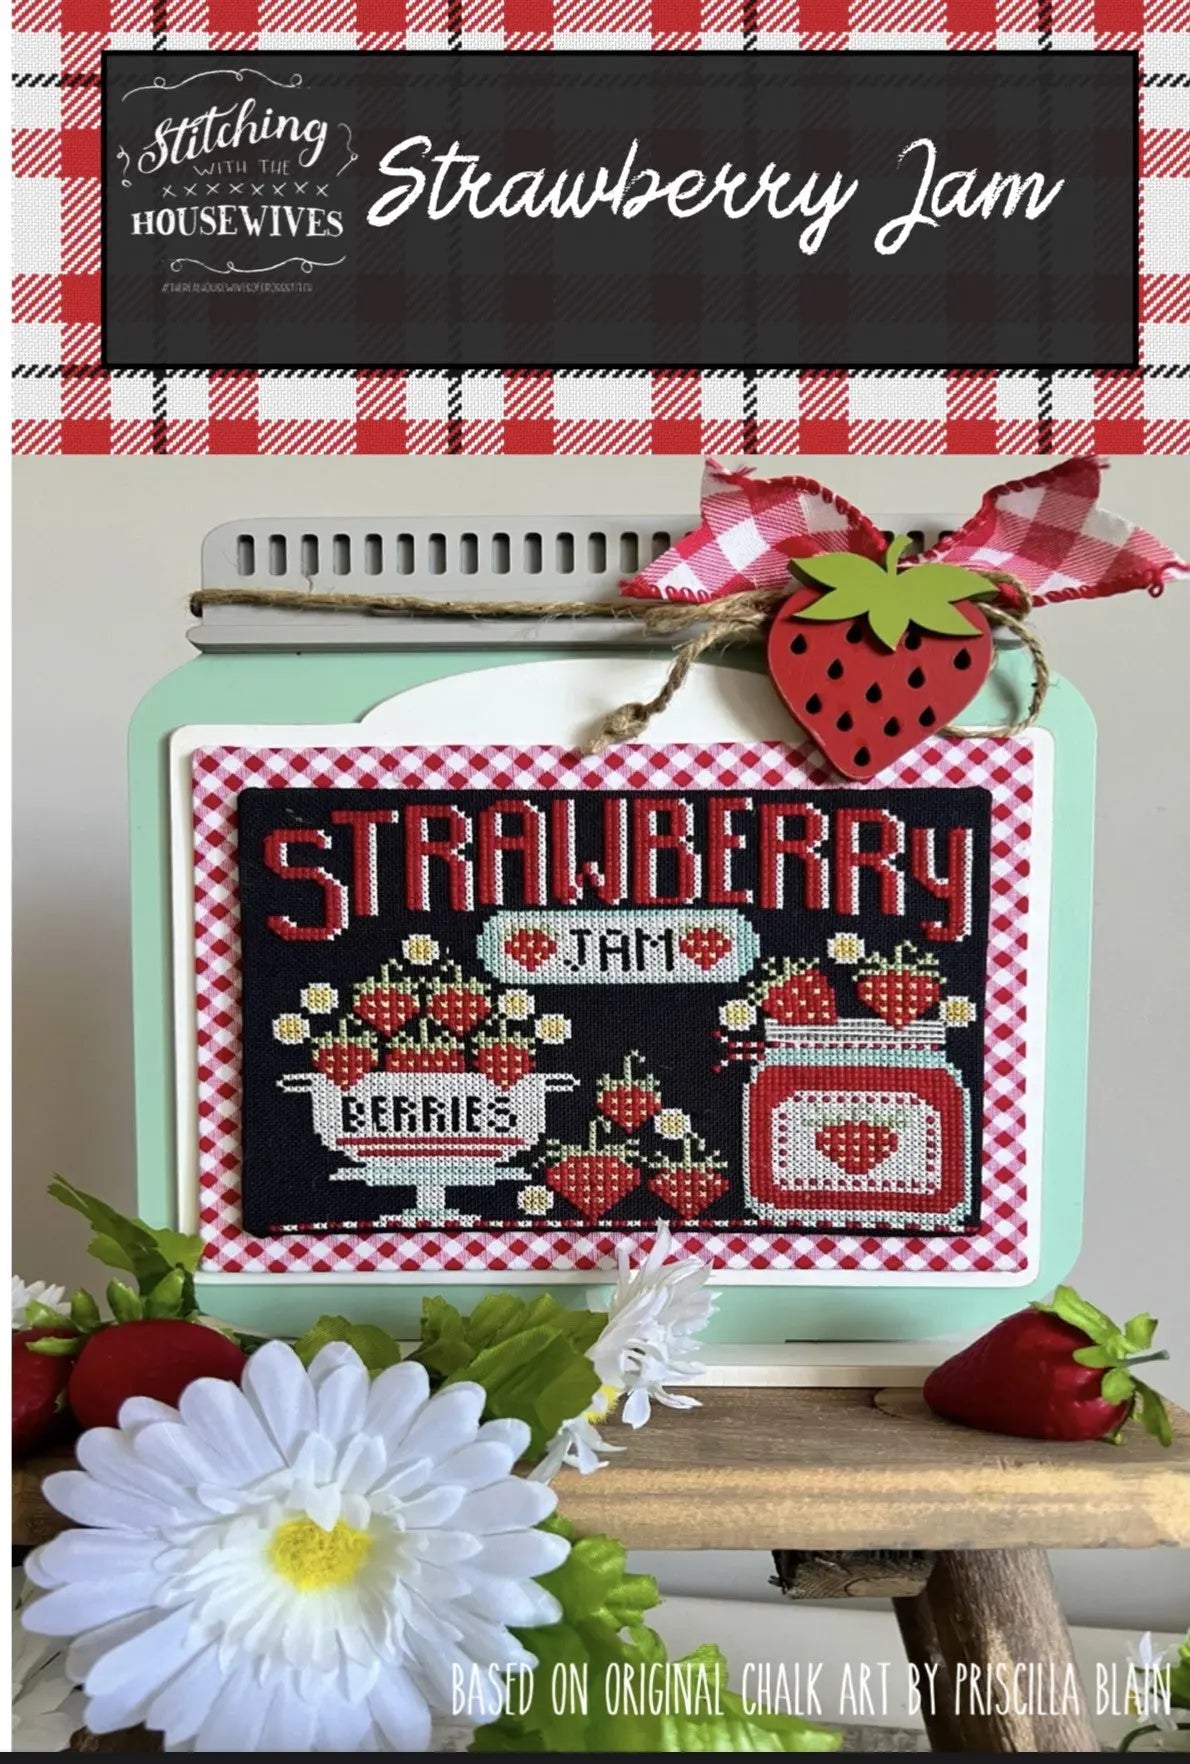 Strawberry Jam by Stitching With the Housewives Stitching with the Housewives